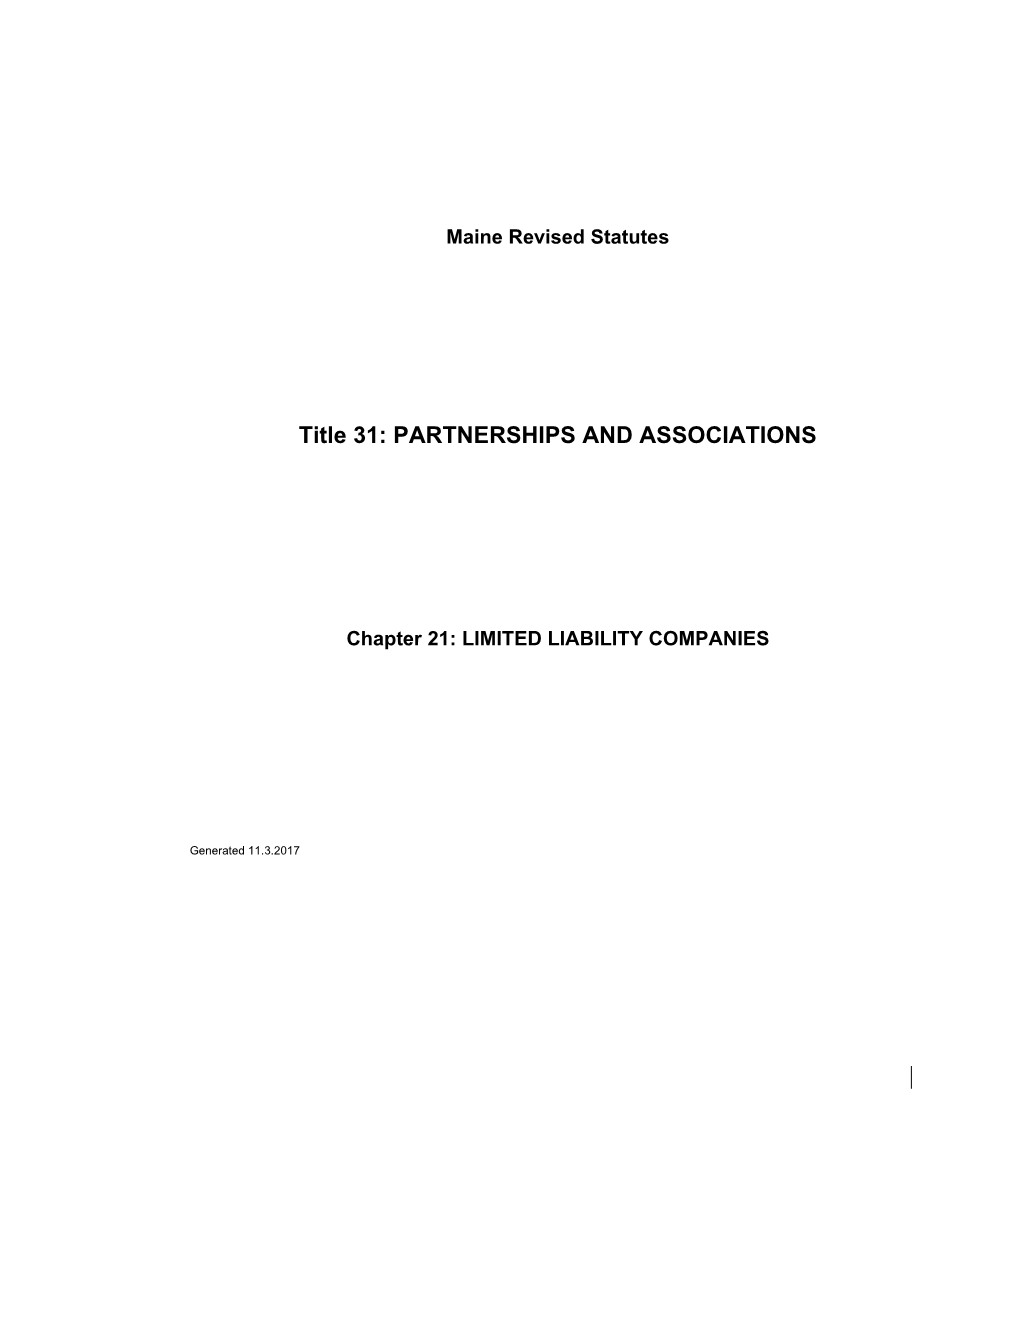 MRS Title 31 1604. REVIVAL of LIMITED LIABILITY COMPANY AFTER DISSOLUTION